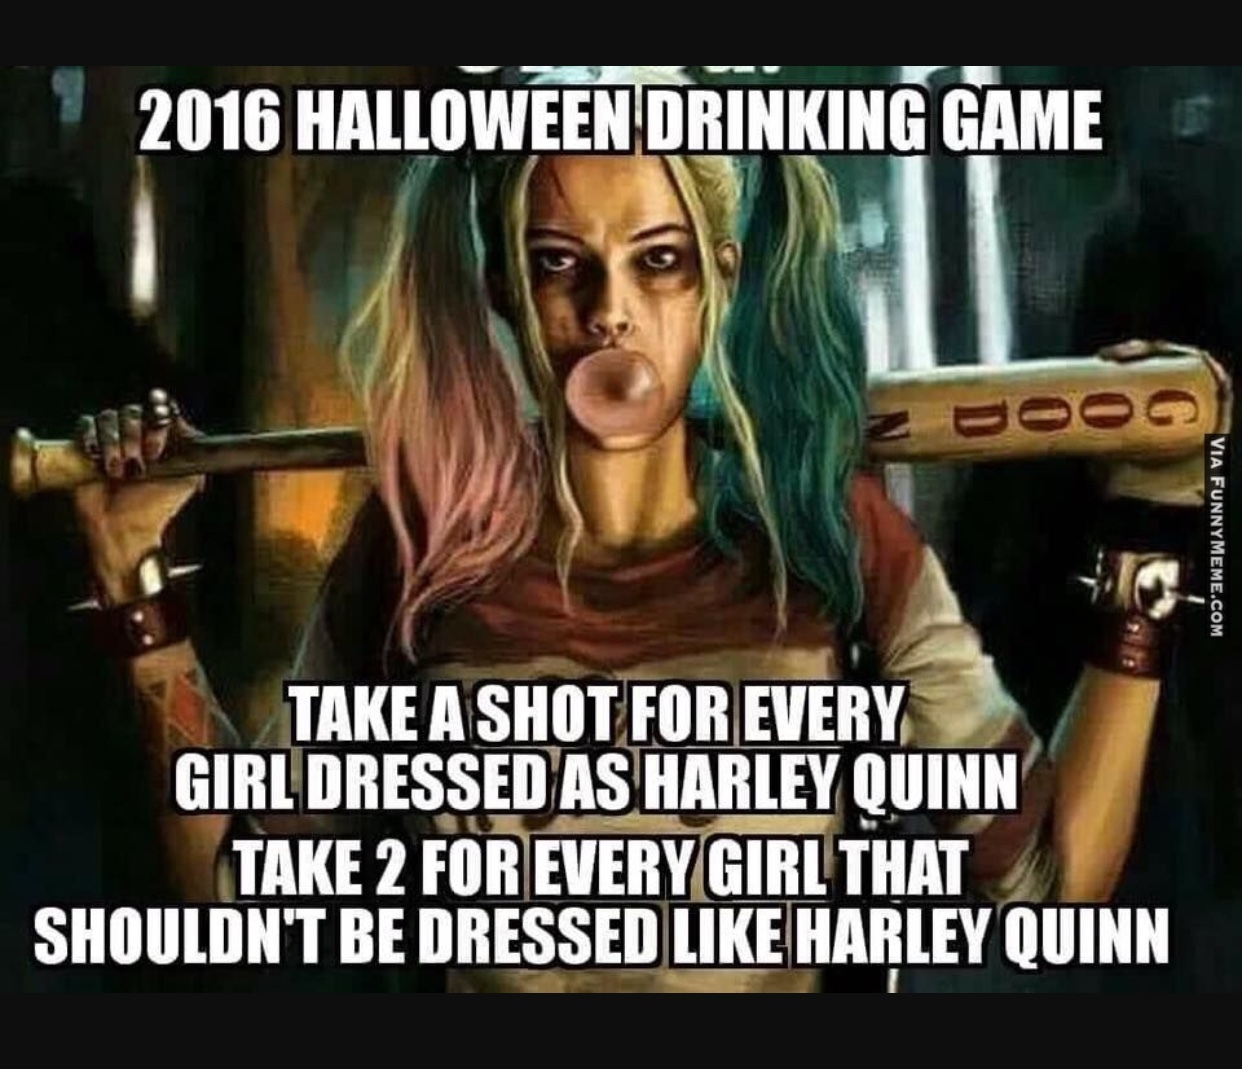 I'm gonna get really drunk this Halloween then - meme